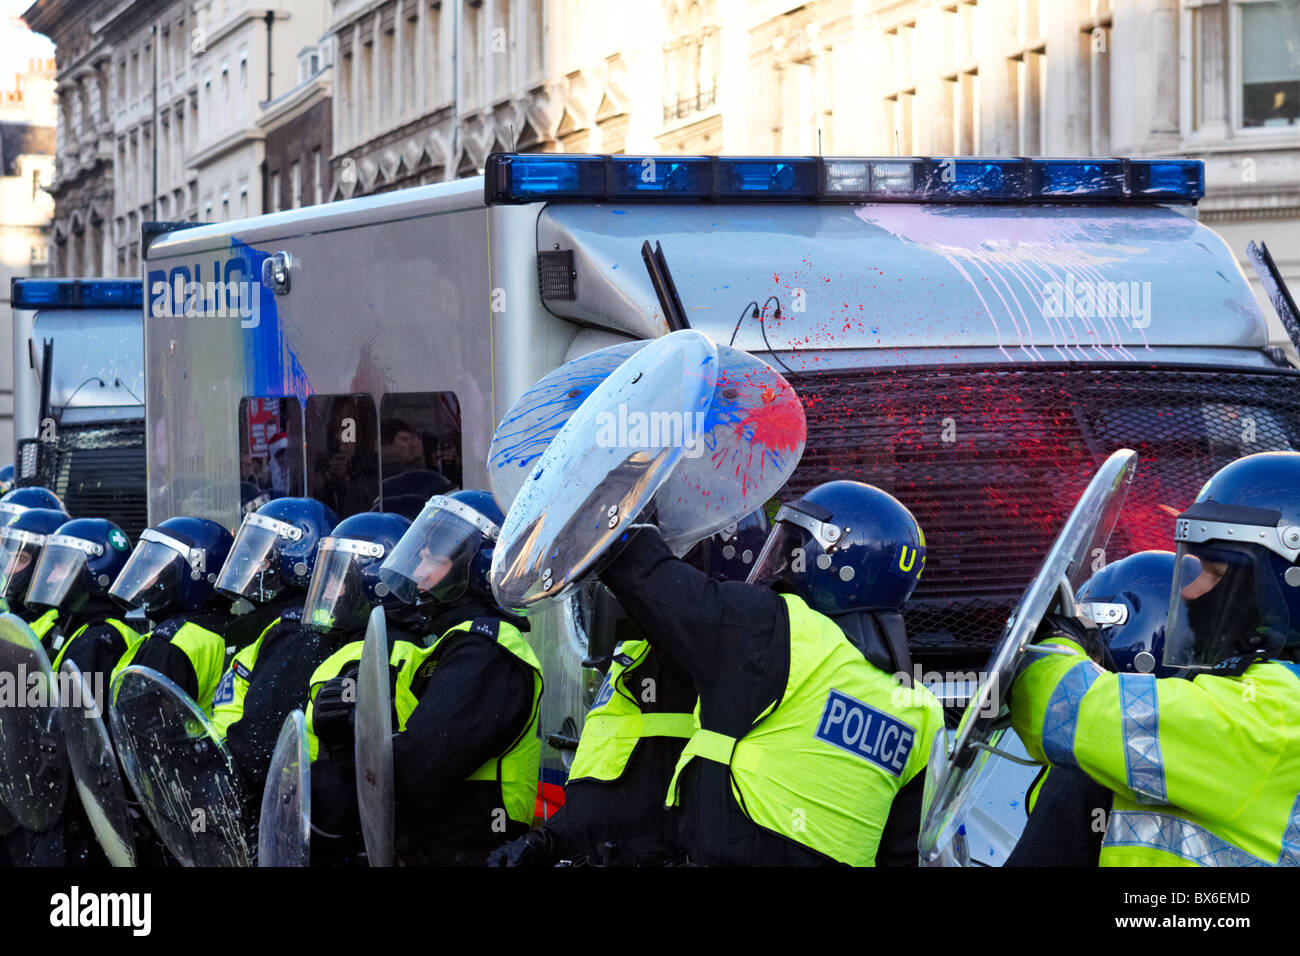 Police Spray Uk High Resolution Stock Photography and Images - Alamy